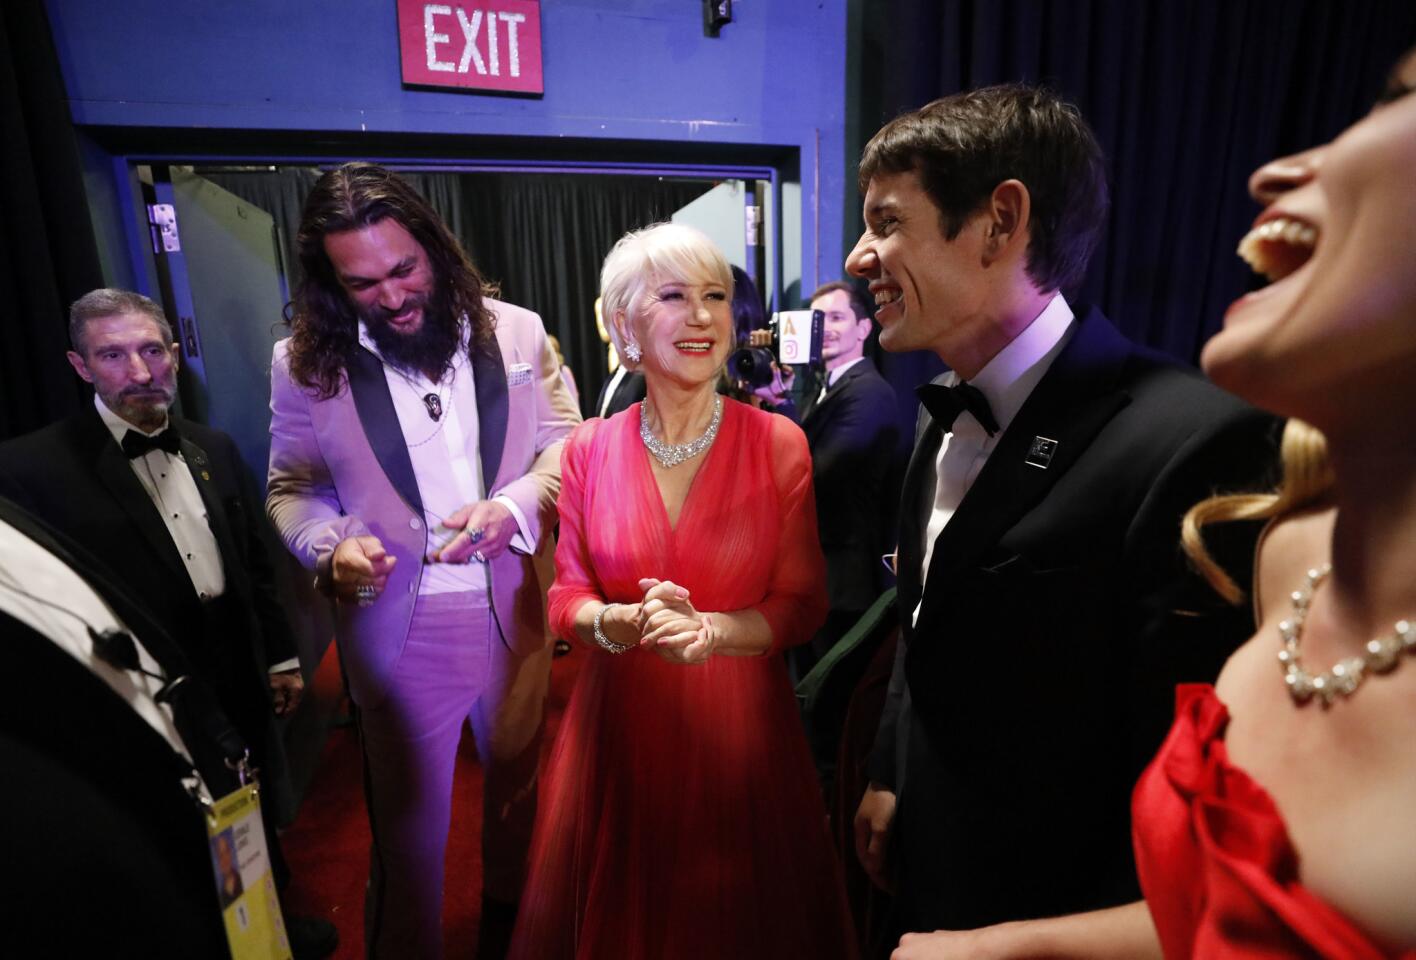 Presenters Jason Momoa and Helen Mirren chat with Alex Honnold, subject of the winning documentary feature, "Free Solo," backstage at the Oscars.